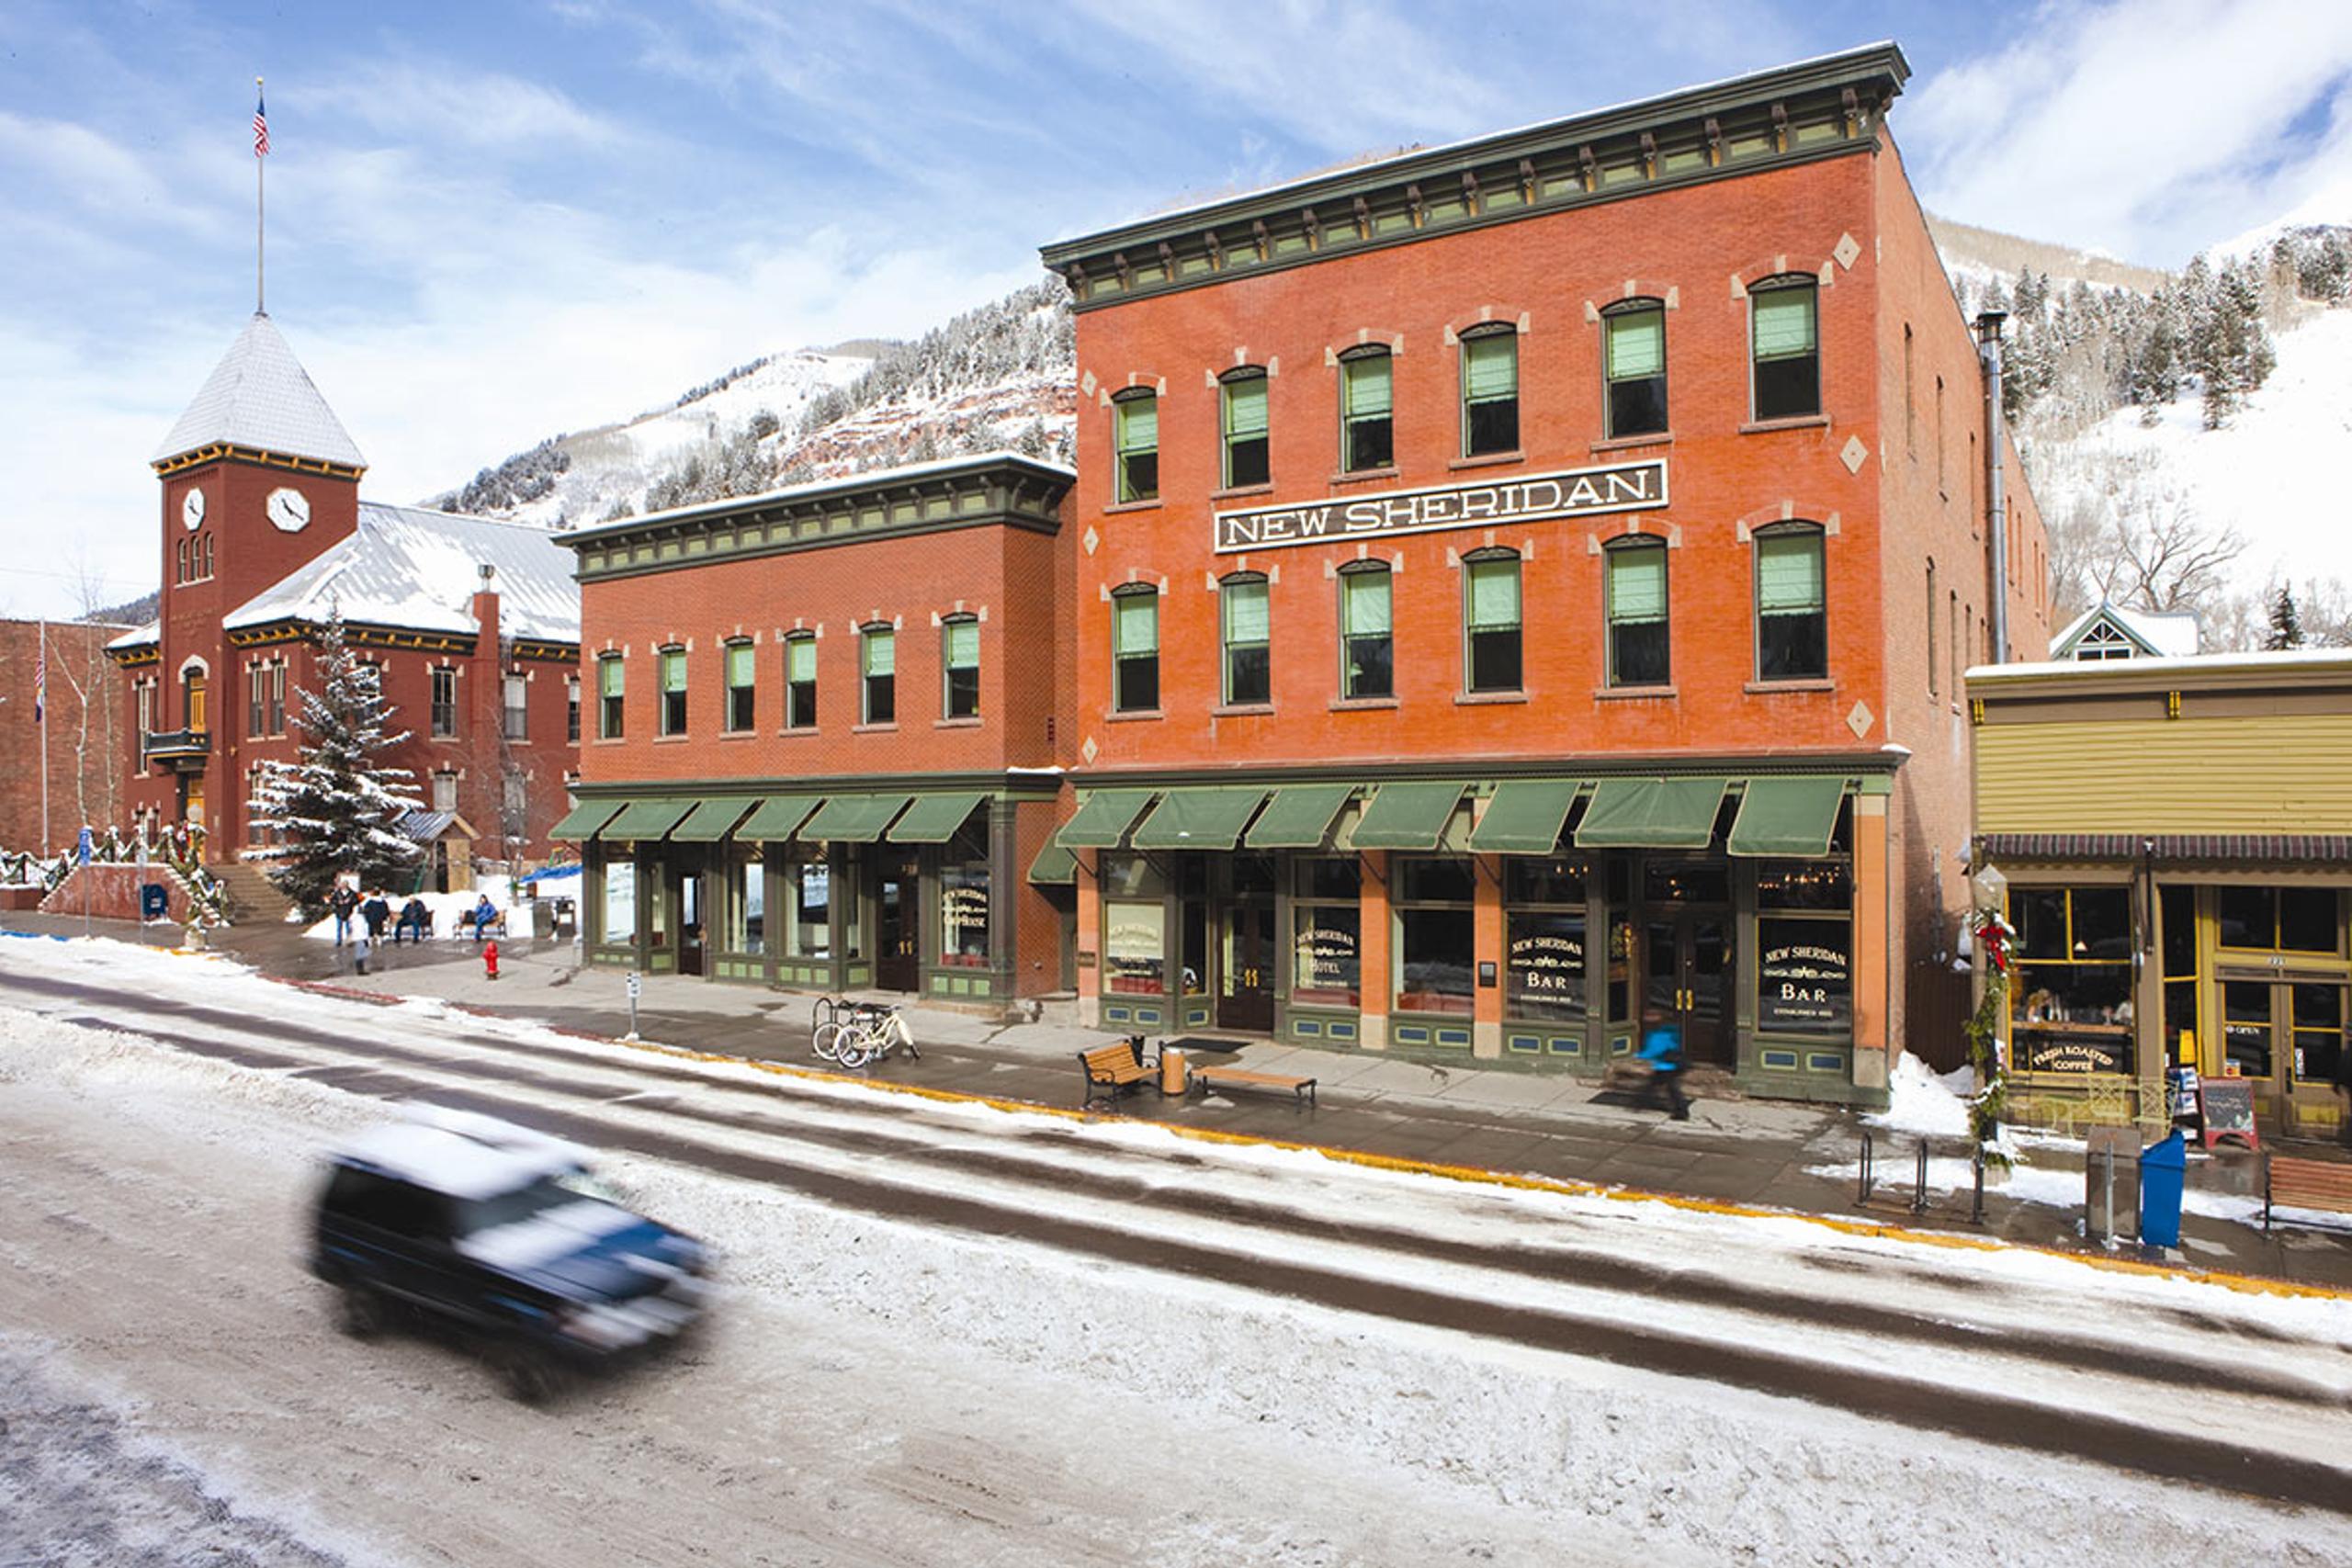 New Sheridan Historic Bar in Telluride with mountain back drop